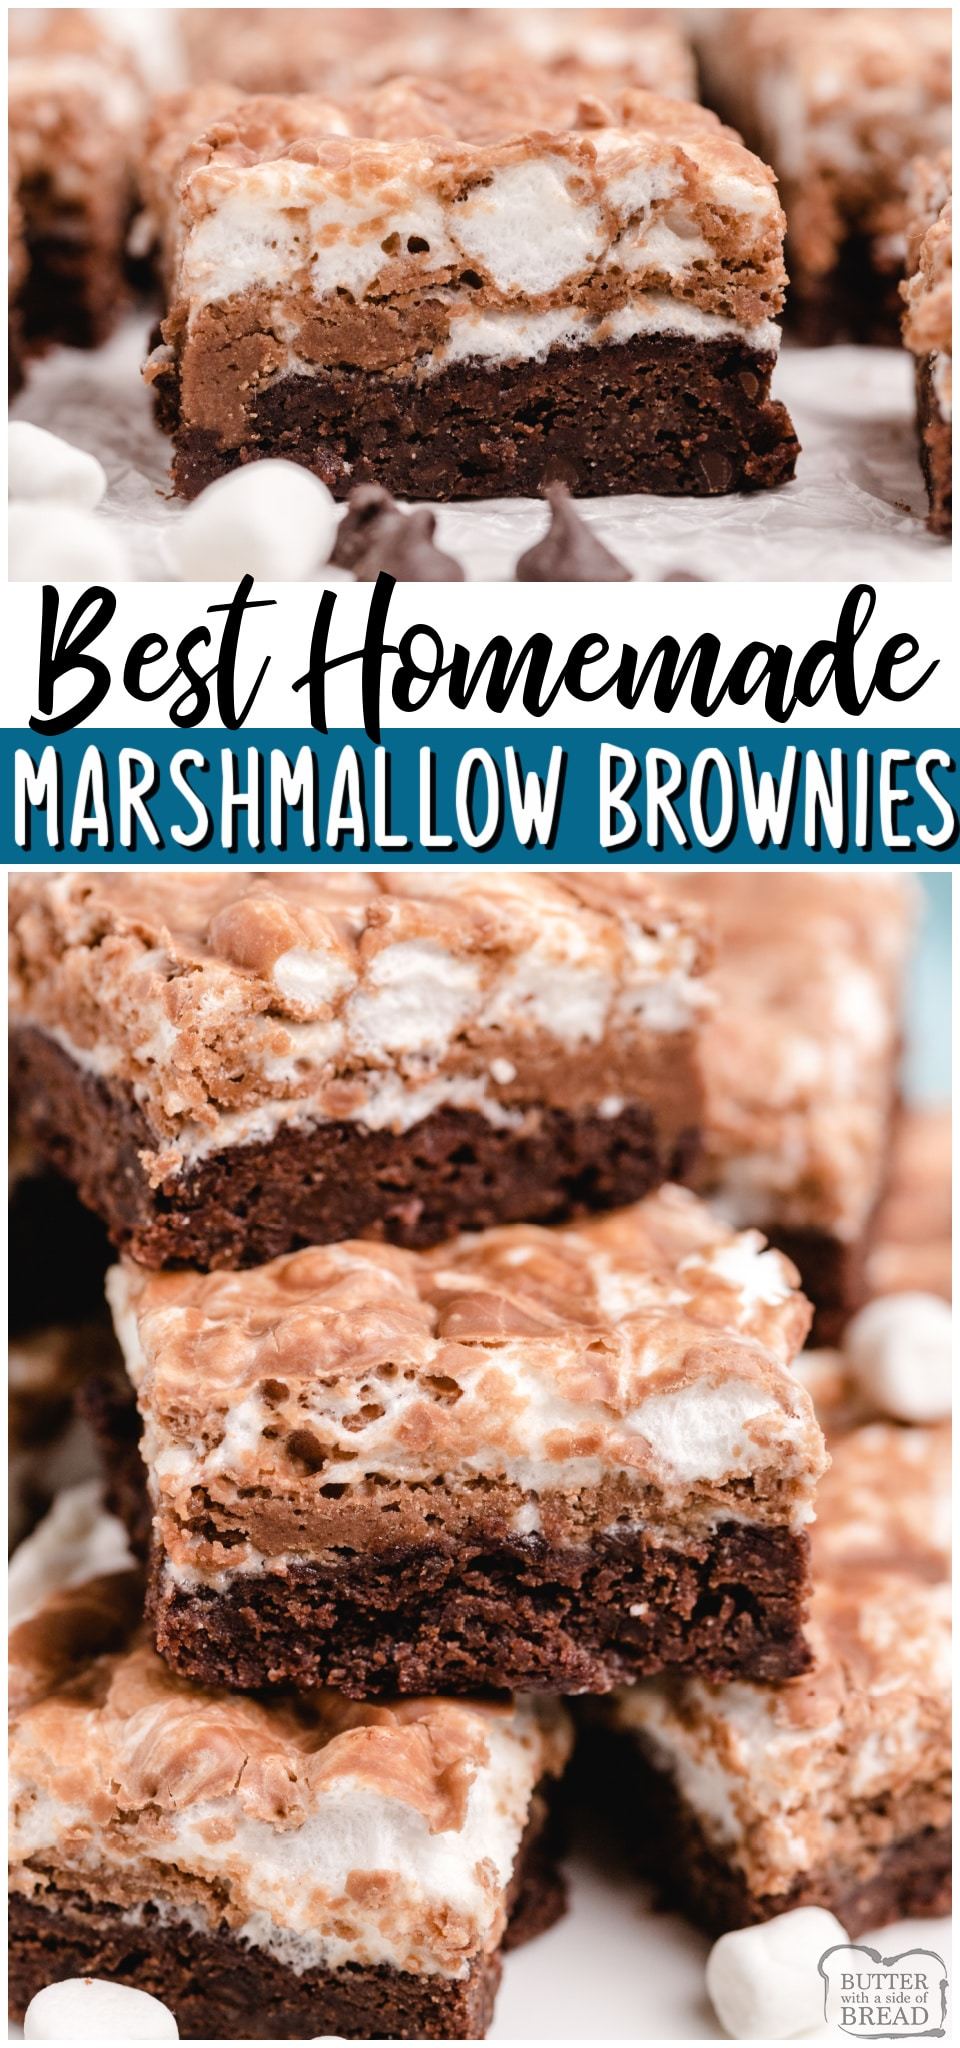 Homemade Marshmallow Brownies are fudgy, chocolaty brownies with a melted marshmallow topping! Perfect from scratch brownie recipe for anyone who loves chocolate & marshmallows! #brownies #chocolate #baking #marshmallows #dessert #easyrecipe from BUTTER WITH A SIDE OF BREAD